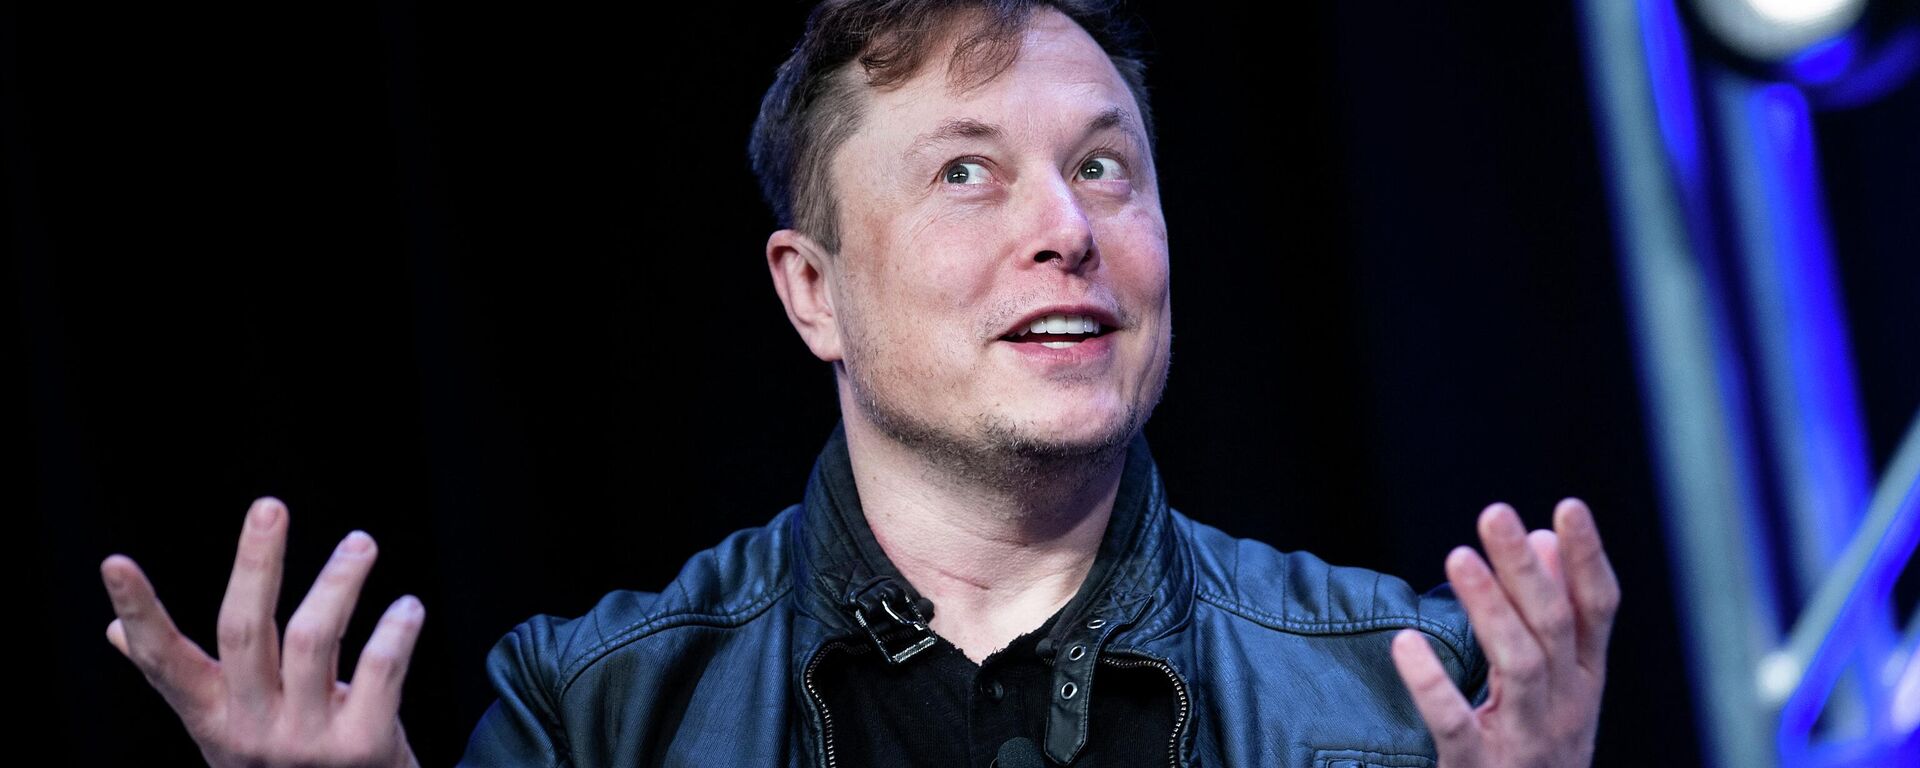 In this file photo taken on March 9, 2020 Elon Musk, founder of SpaceX, speaks during the Satellite 2020 at the Washington Convention Center in Washington, DC - Sputnik International, 1920, 08.05.2022